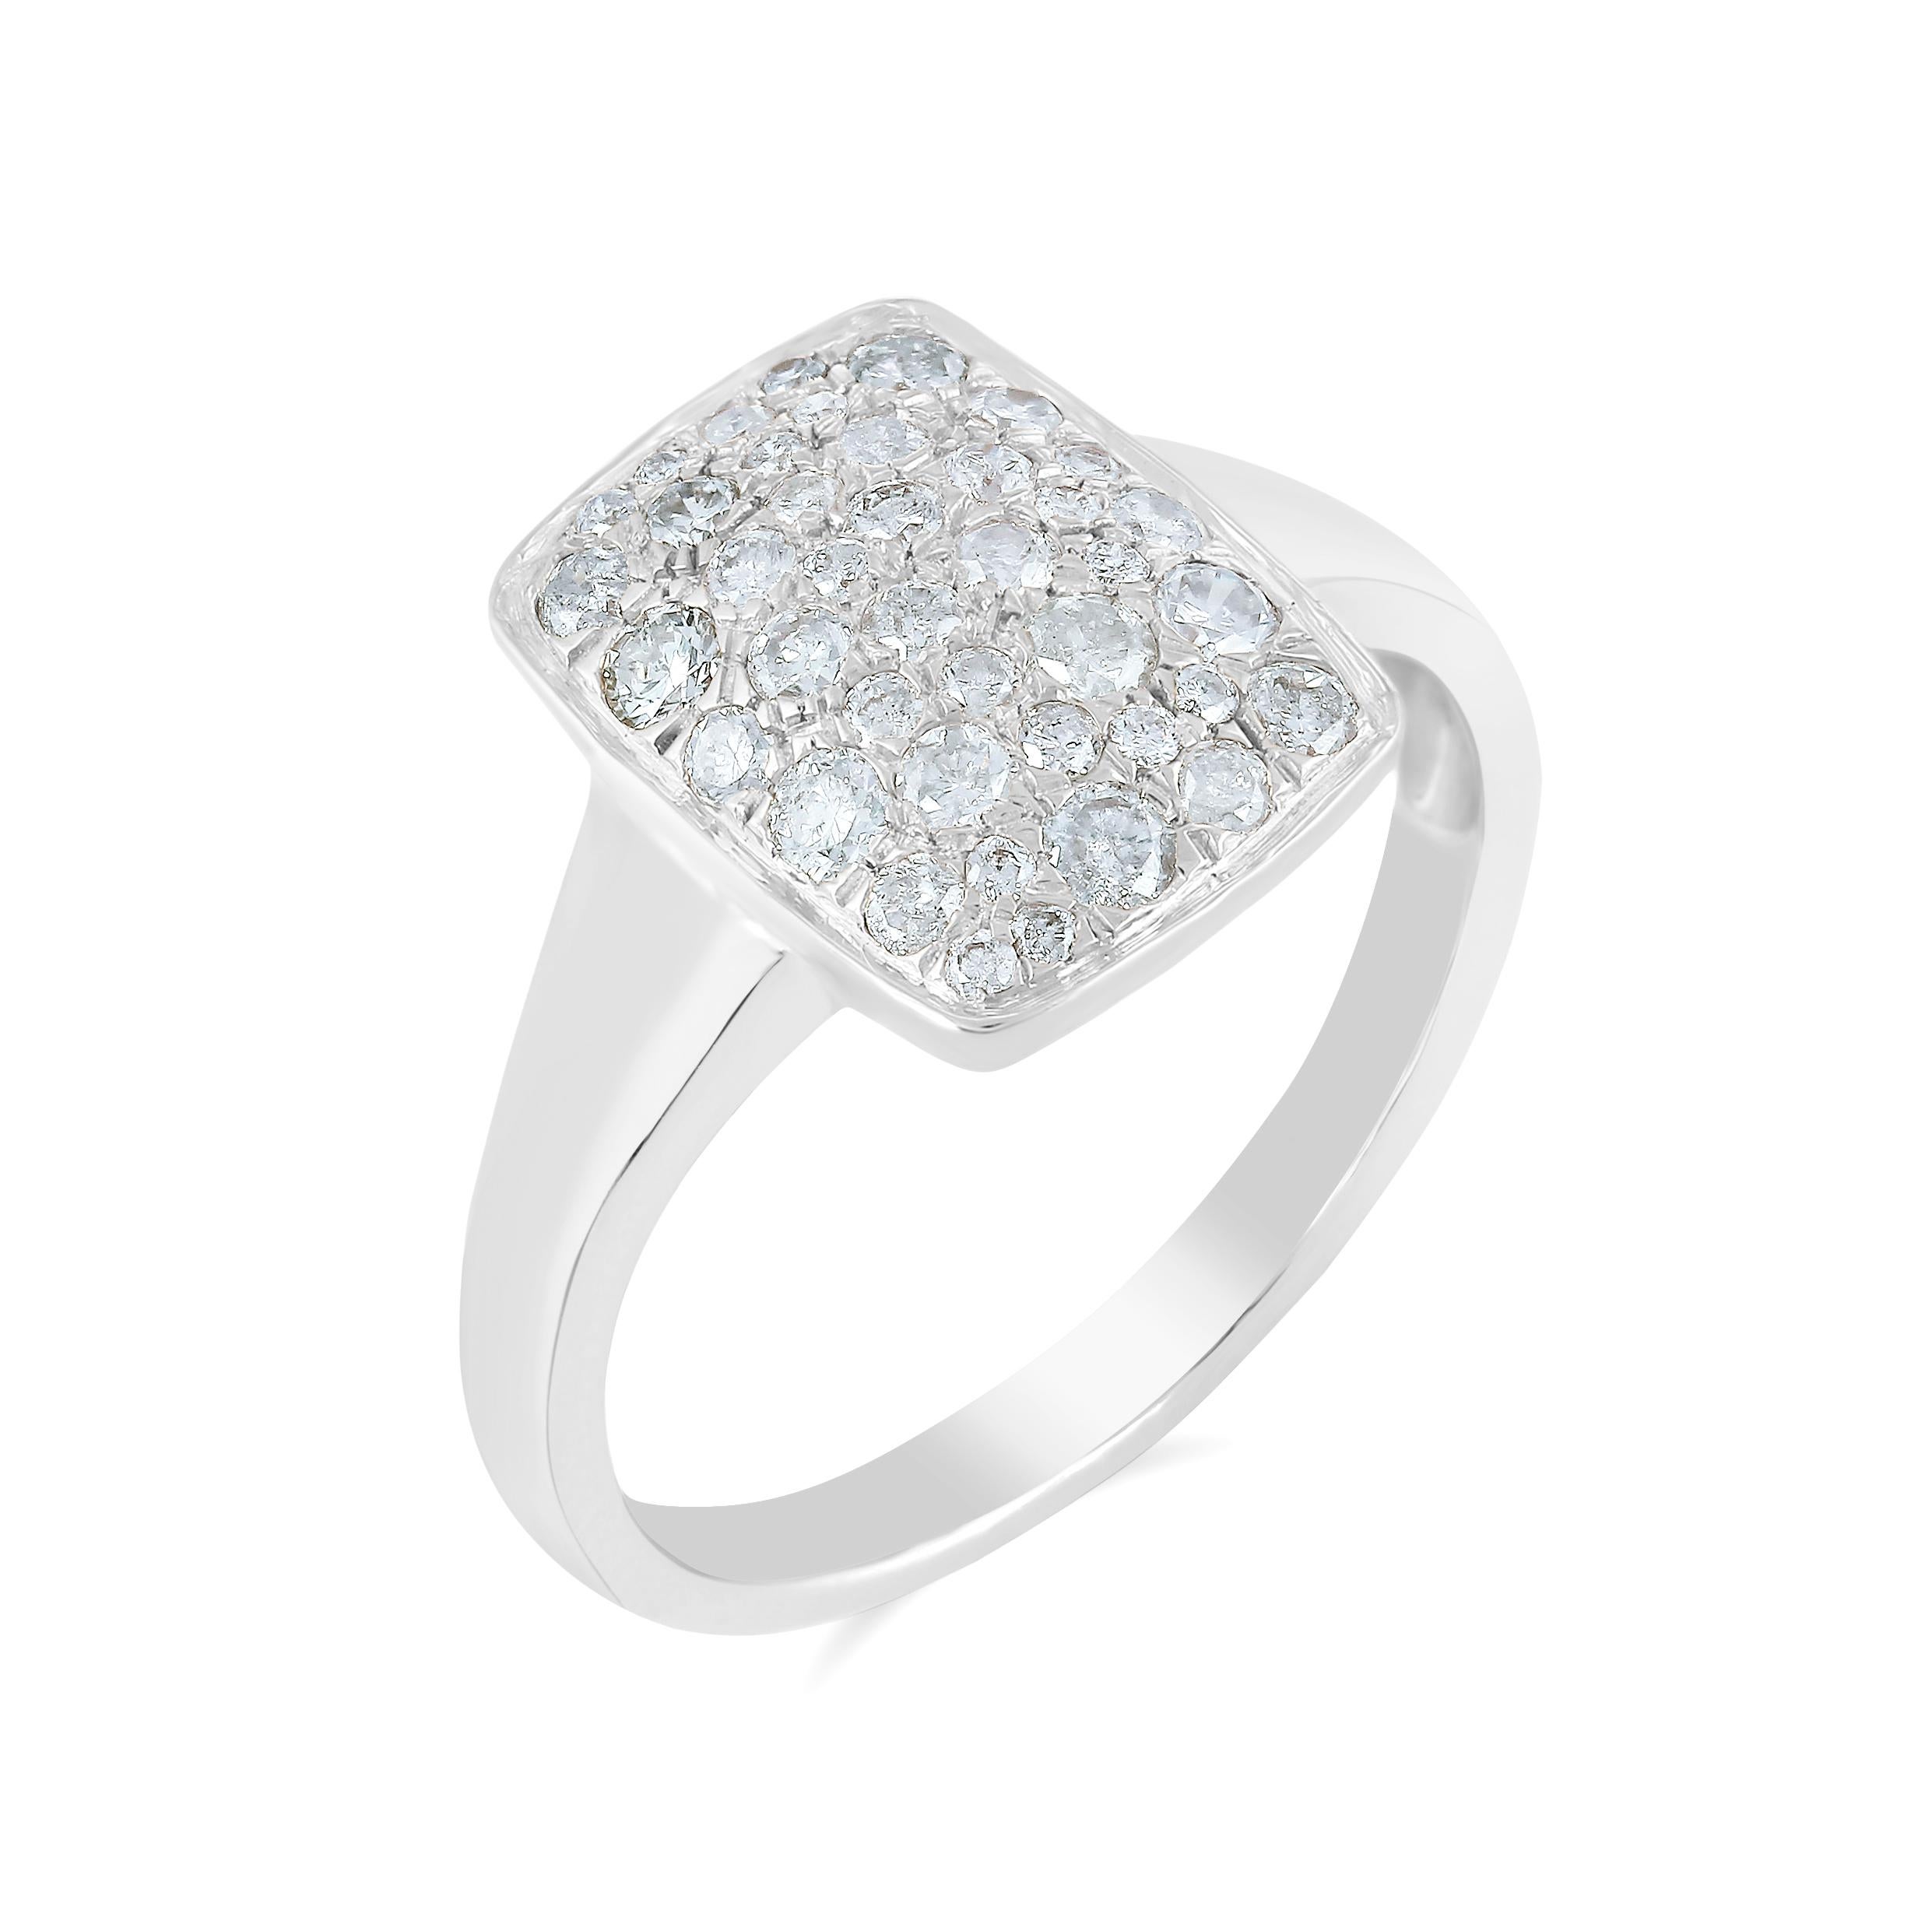 Round Cut Gemistry 0.63cttw Diamond Cluster Ring in 925 Sterling Silver For Sale